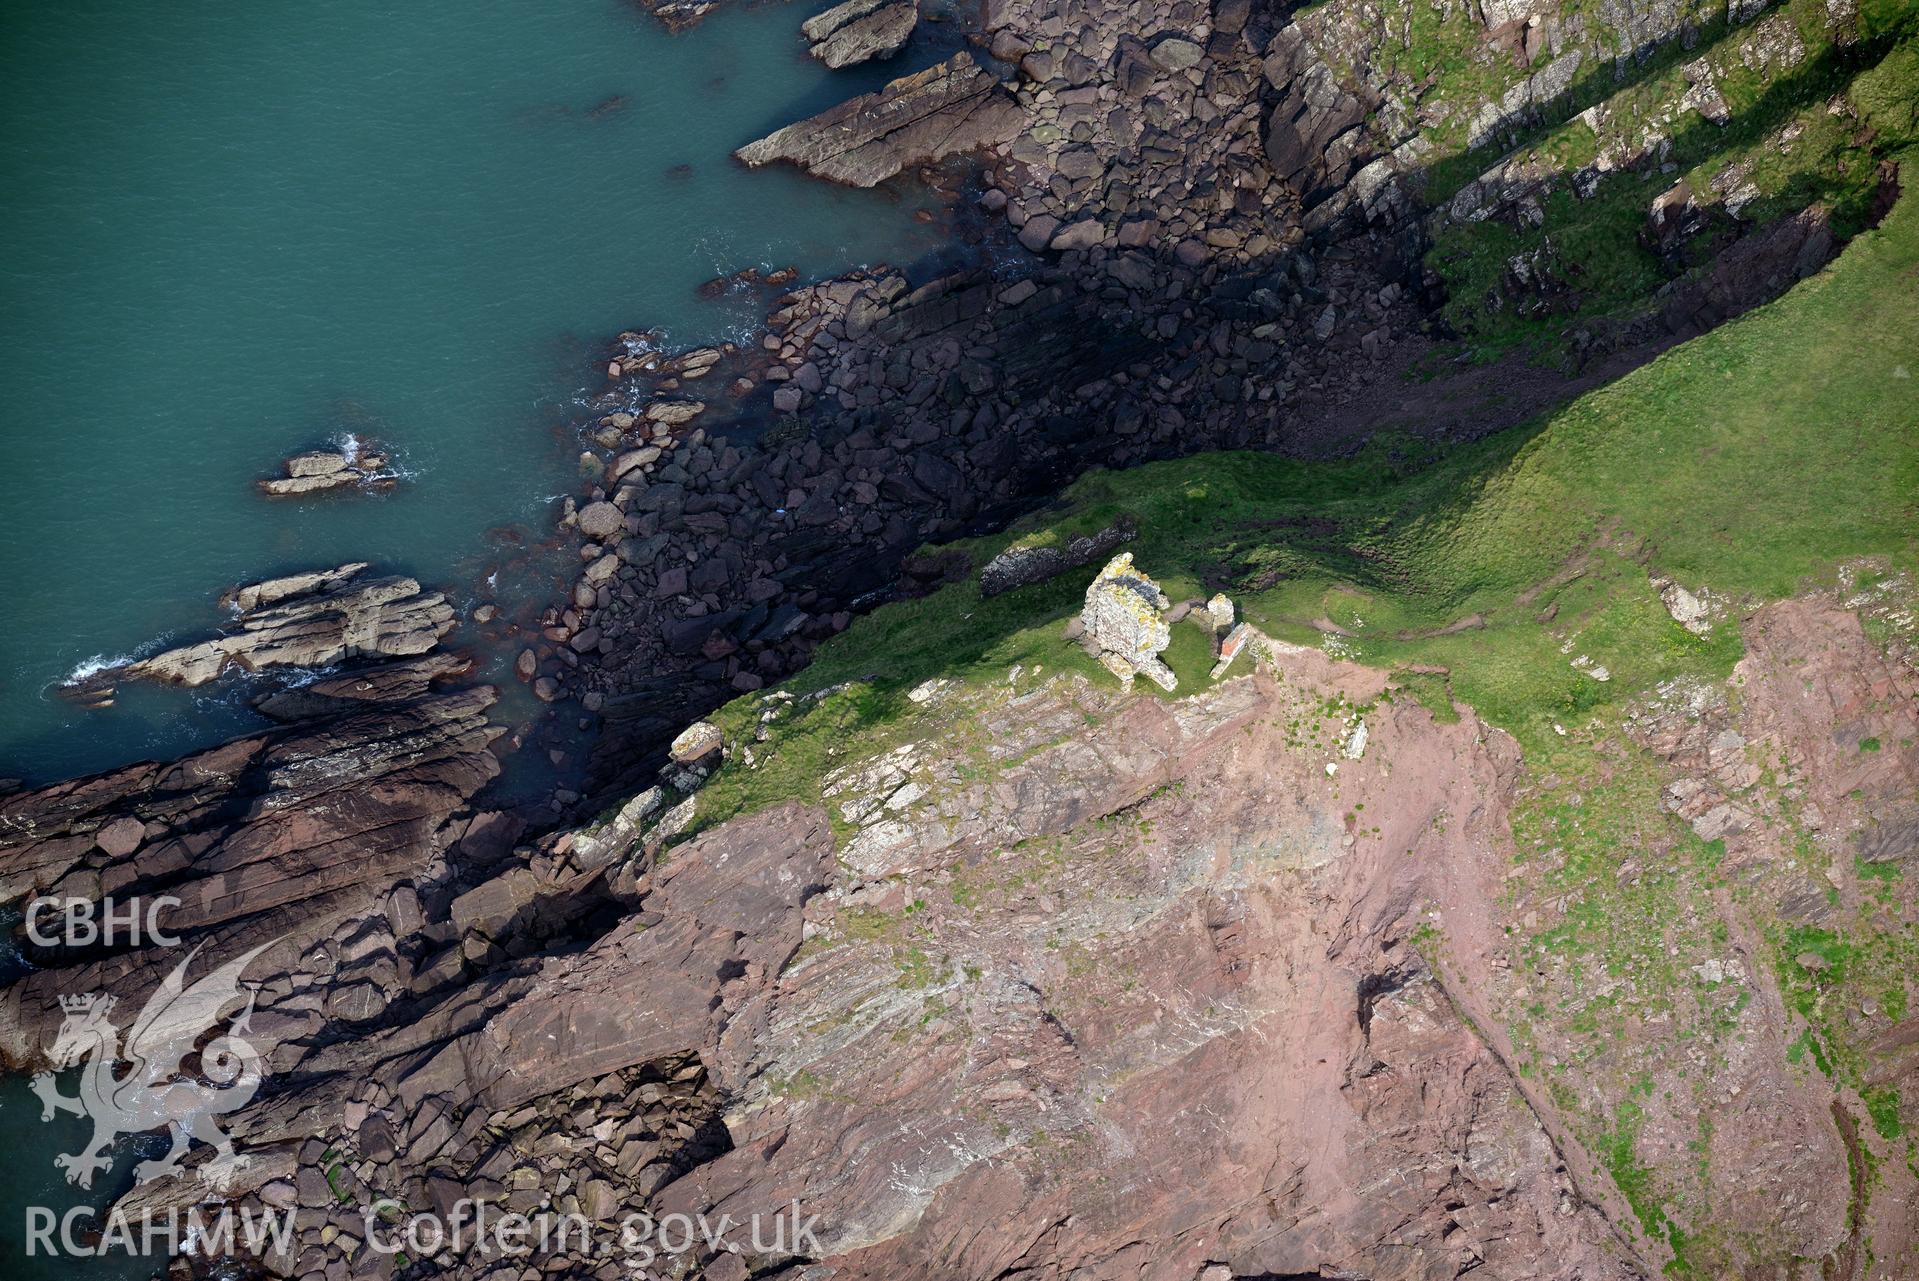 Aerial photography of East Blockhouse taken on 27th March 2017. Baseline aerial reconnaissance survey for the CHERISH Project. ? Crown: CHERISH PROJECT 2019. Produced with EU funds through the Ireland Wales Co-operation Programme 2014-2020. All material made freely available through the Open Government Licence.